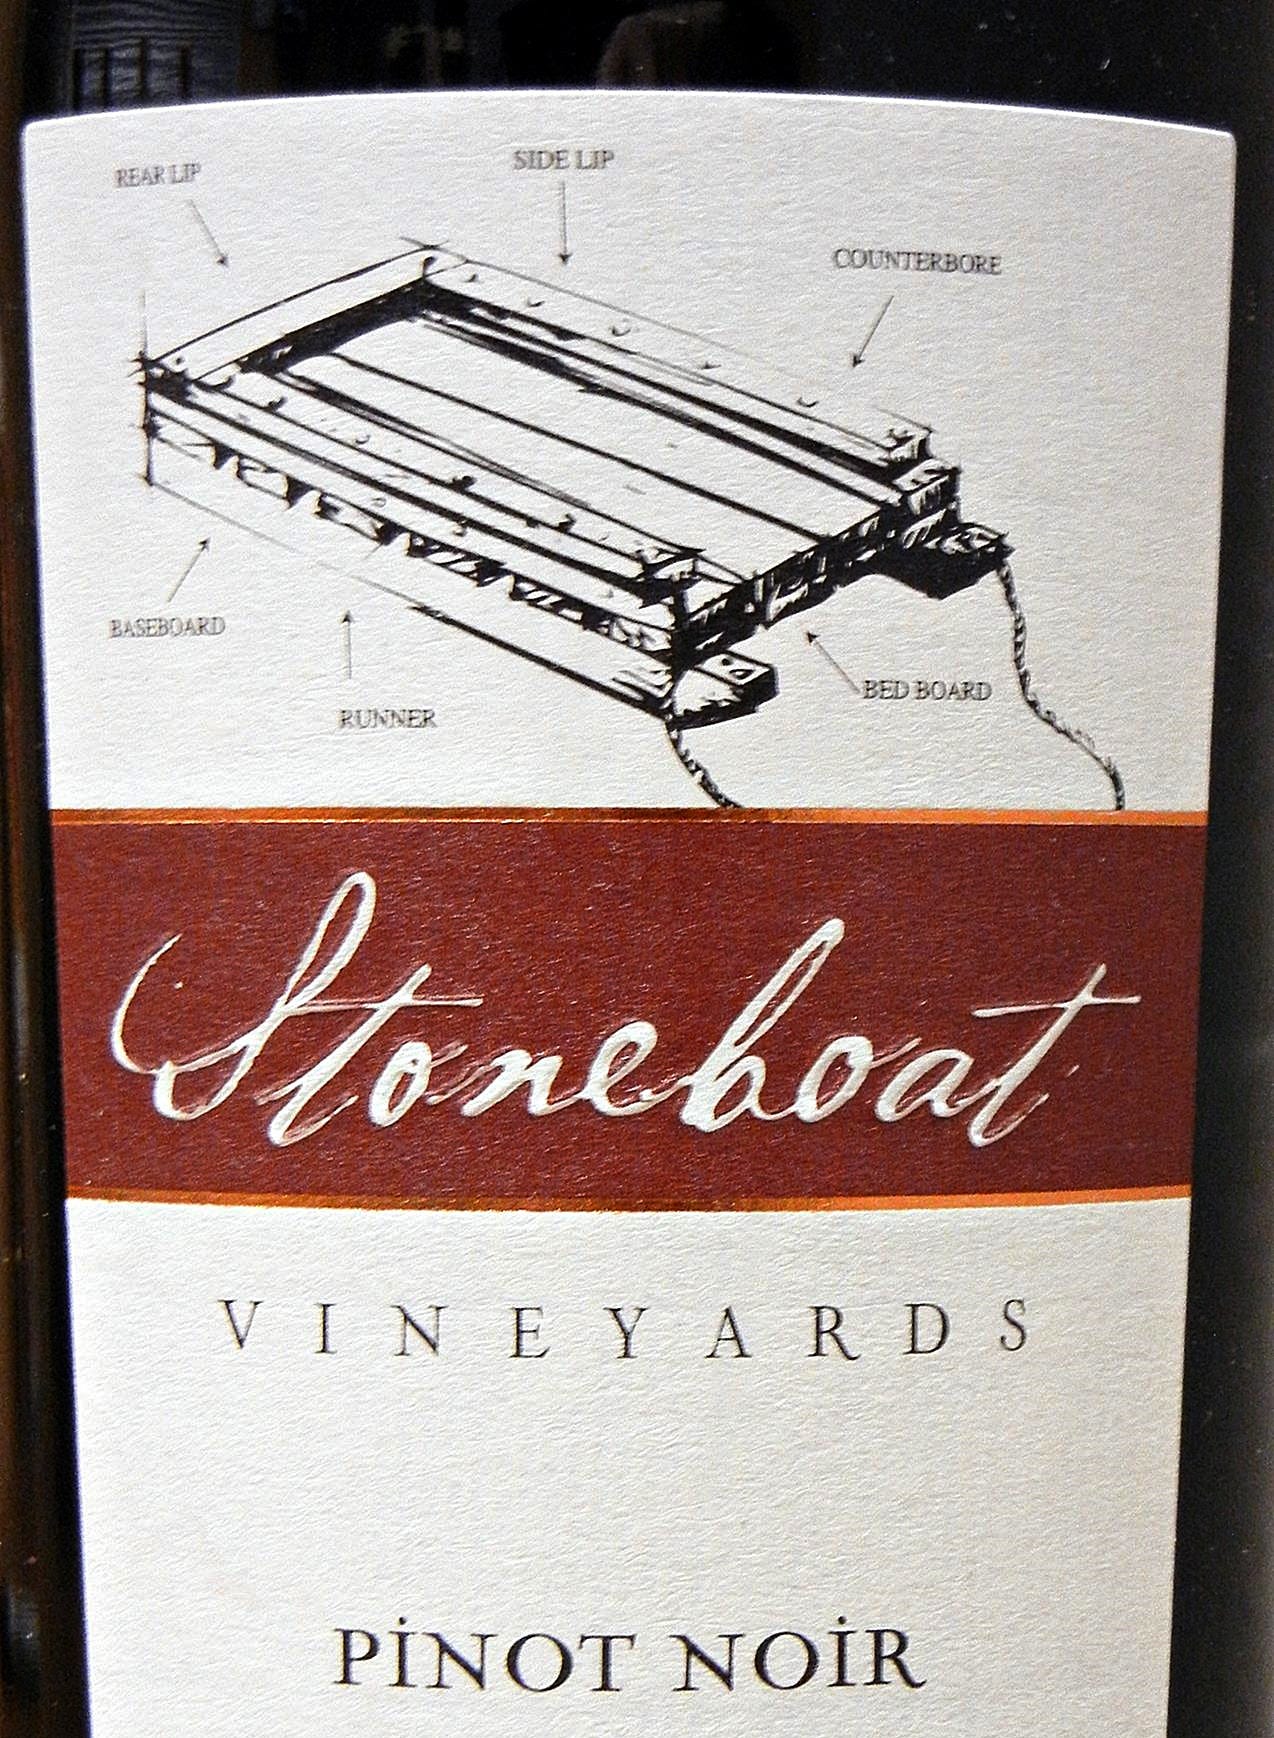 Stoneboat Pinot Noir 2007 Label - BC Pinot Noir Tasting Review 2